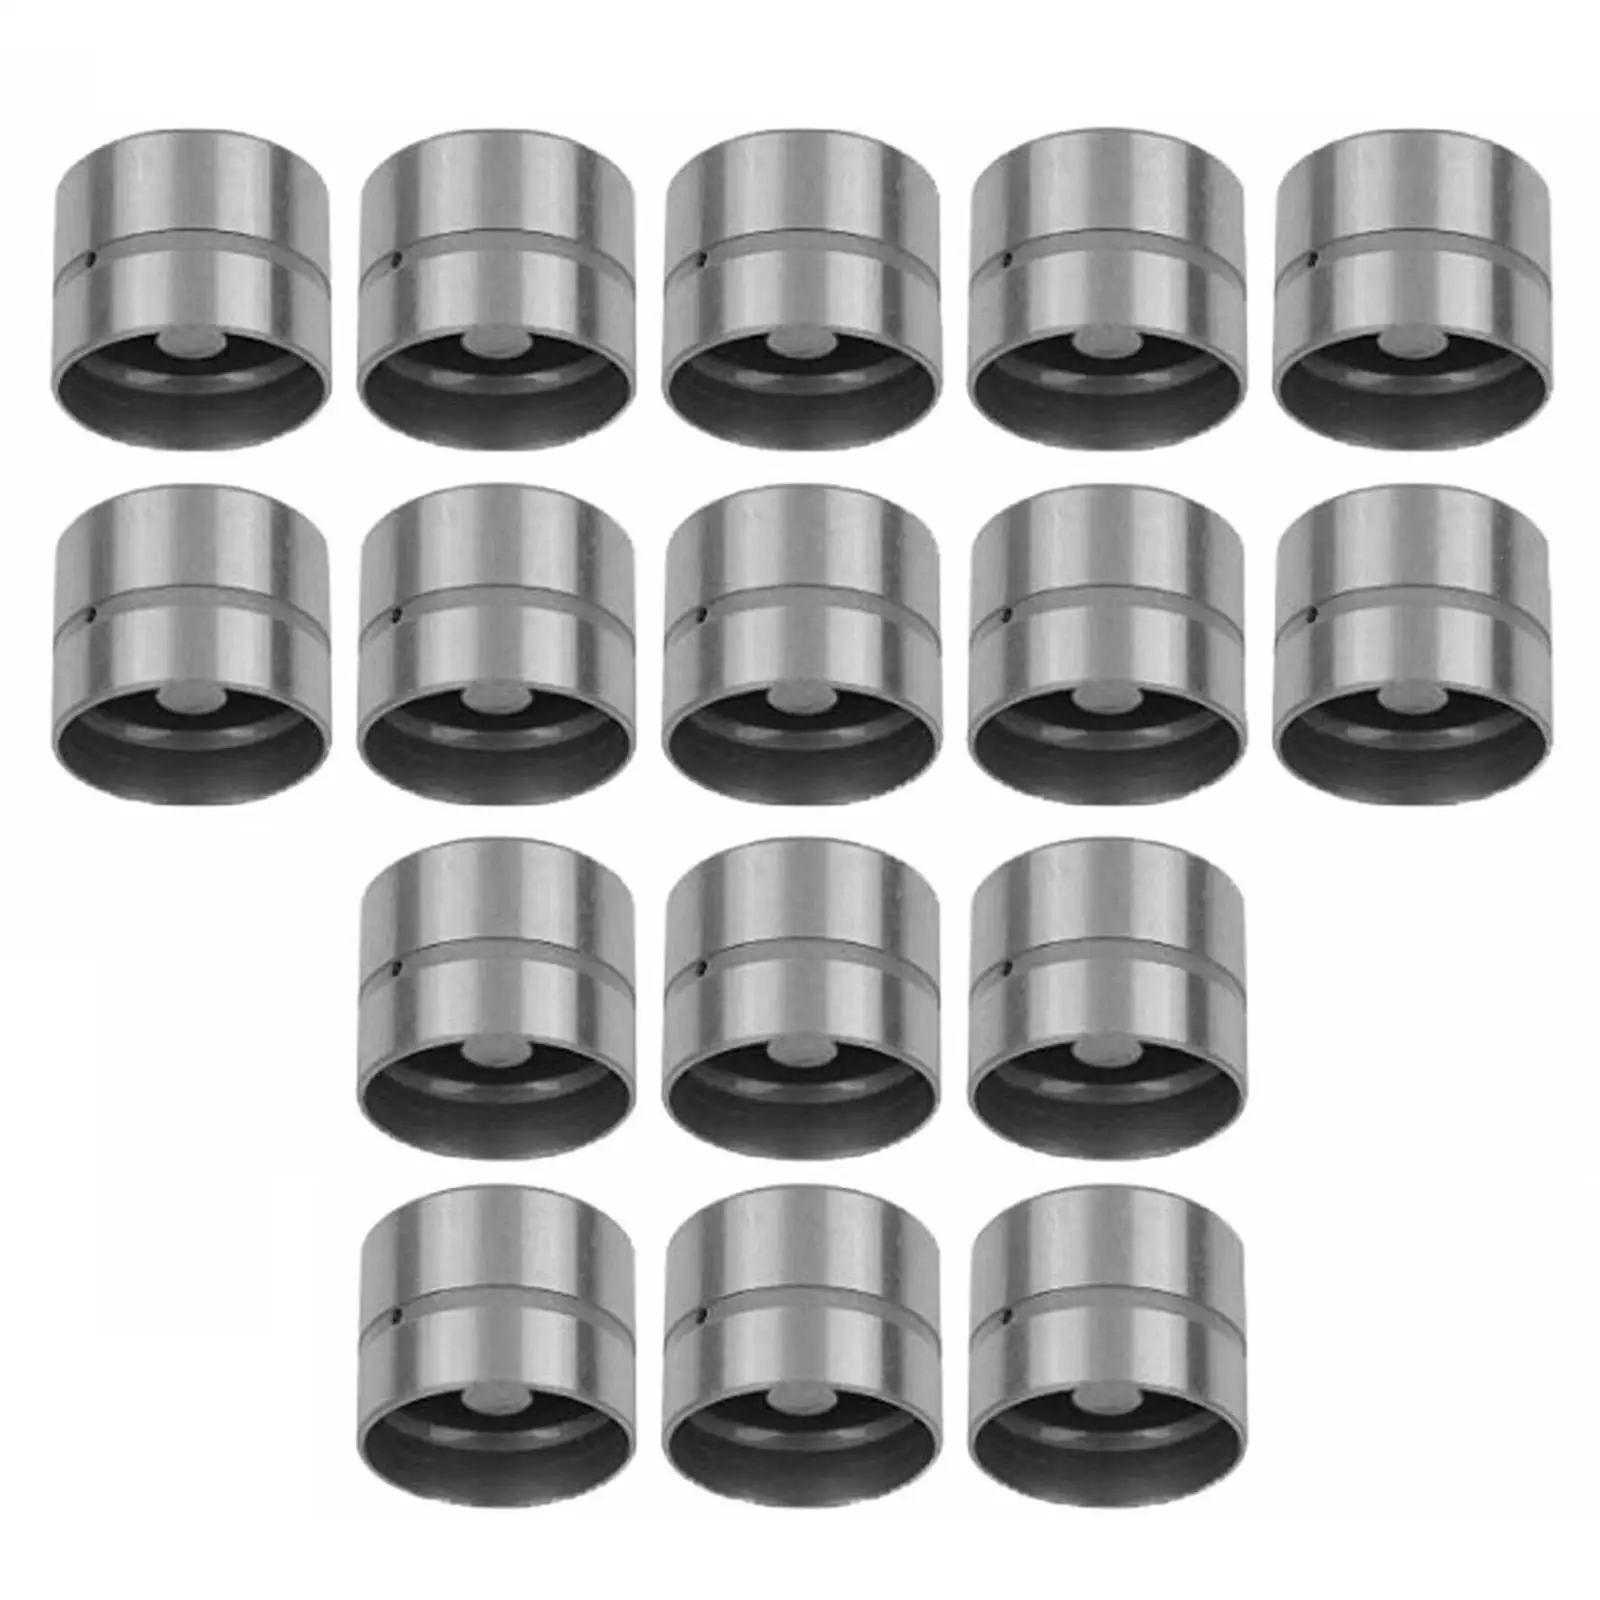 16 Pieces Hydraulic Lifters Tappets Spare Parts Replacement Valves Parts Engine for 20XE C20XE C20Let x20Xev 420011810